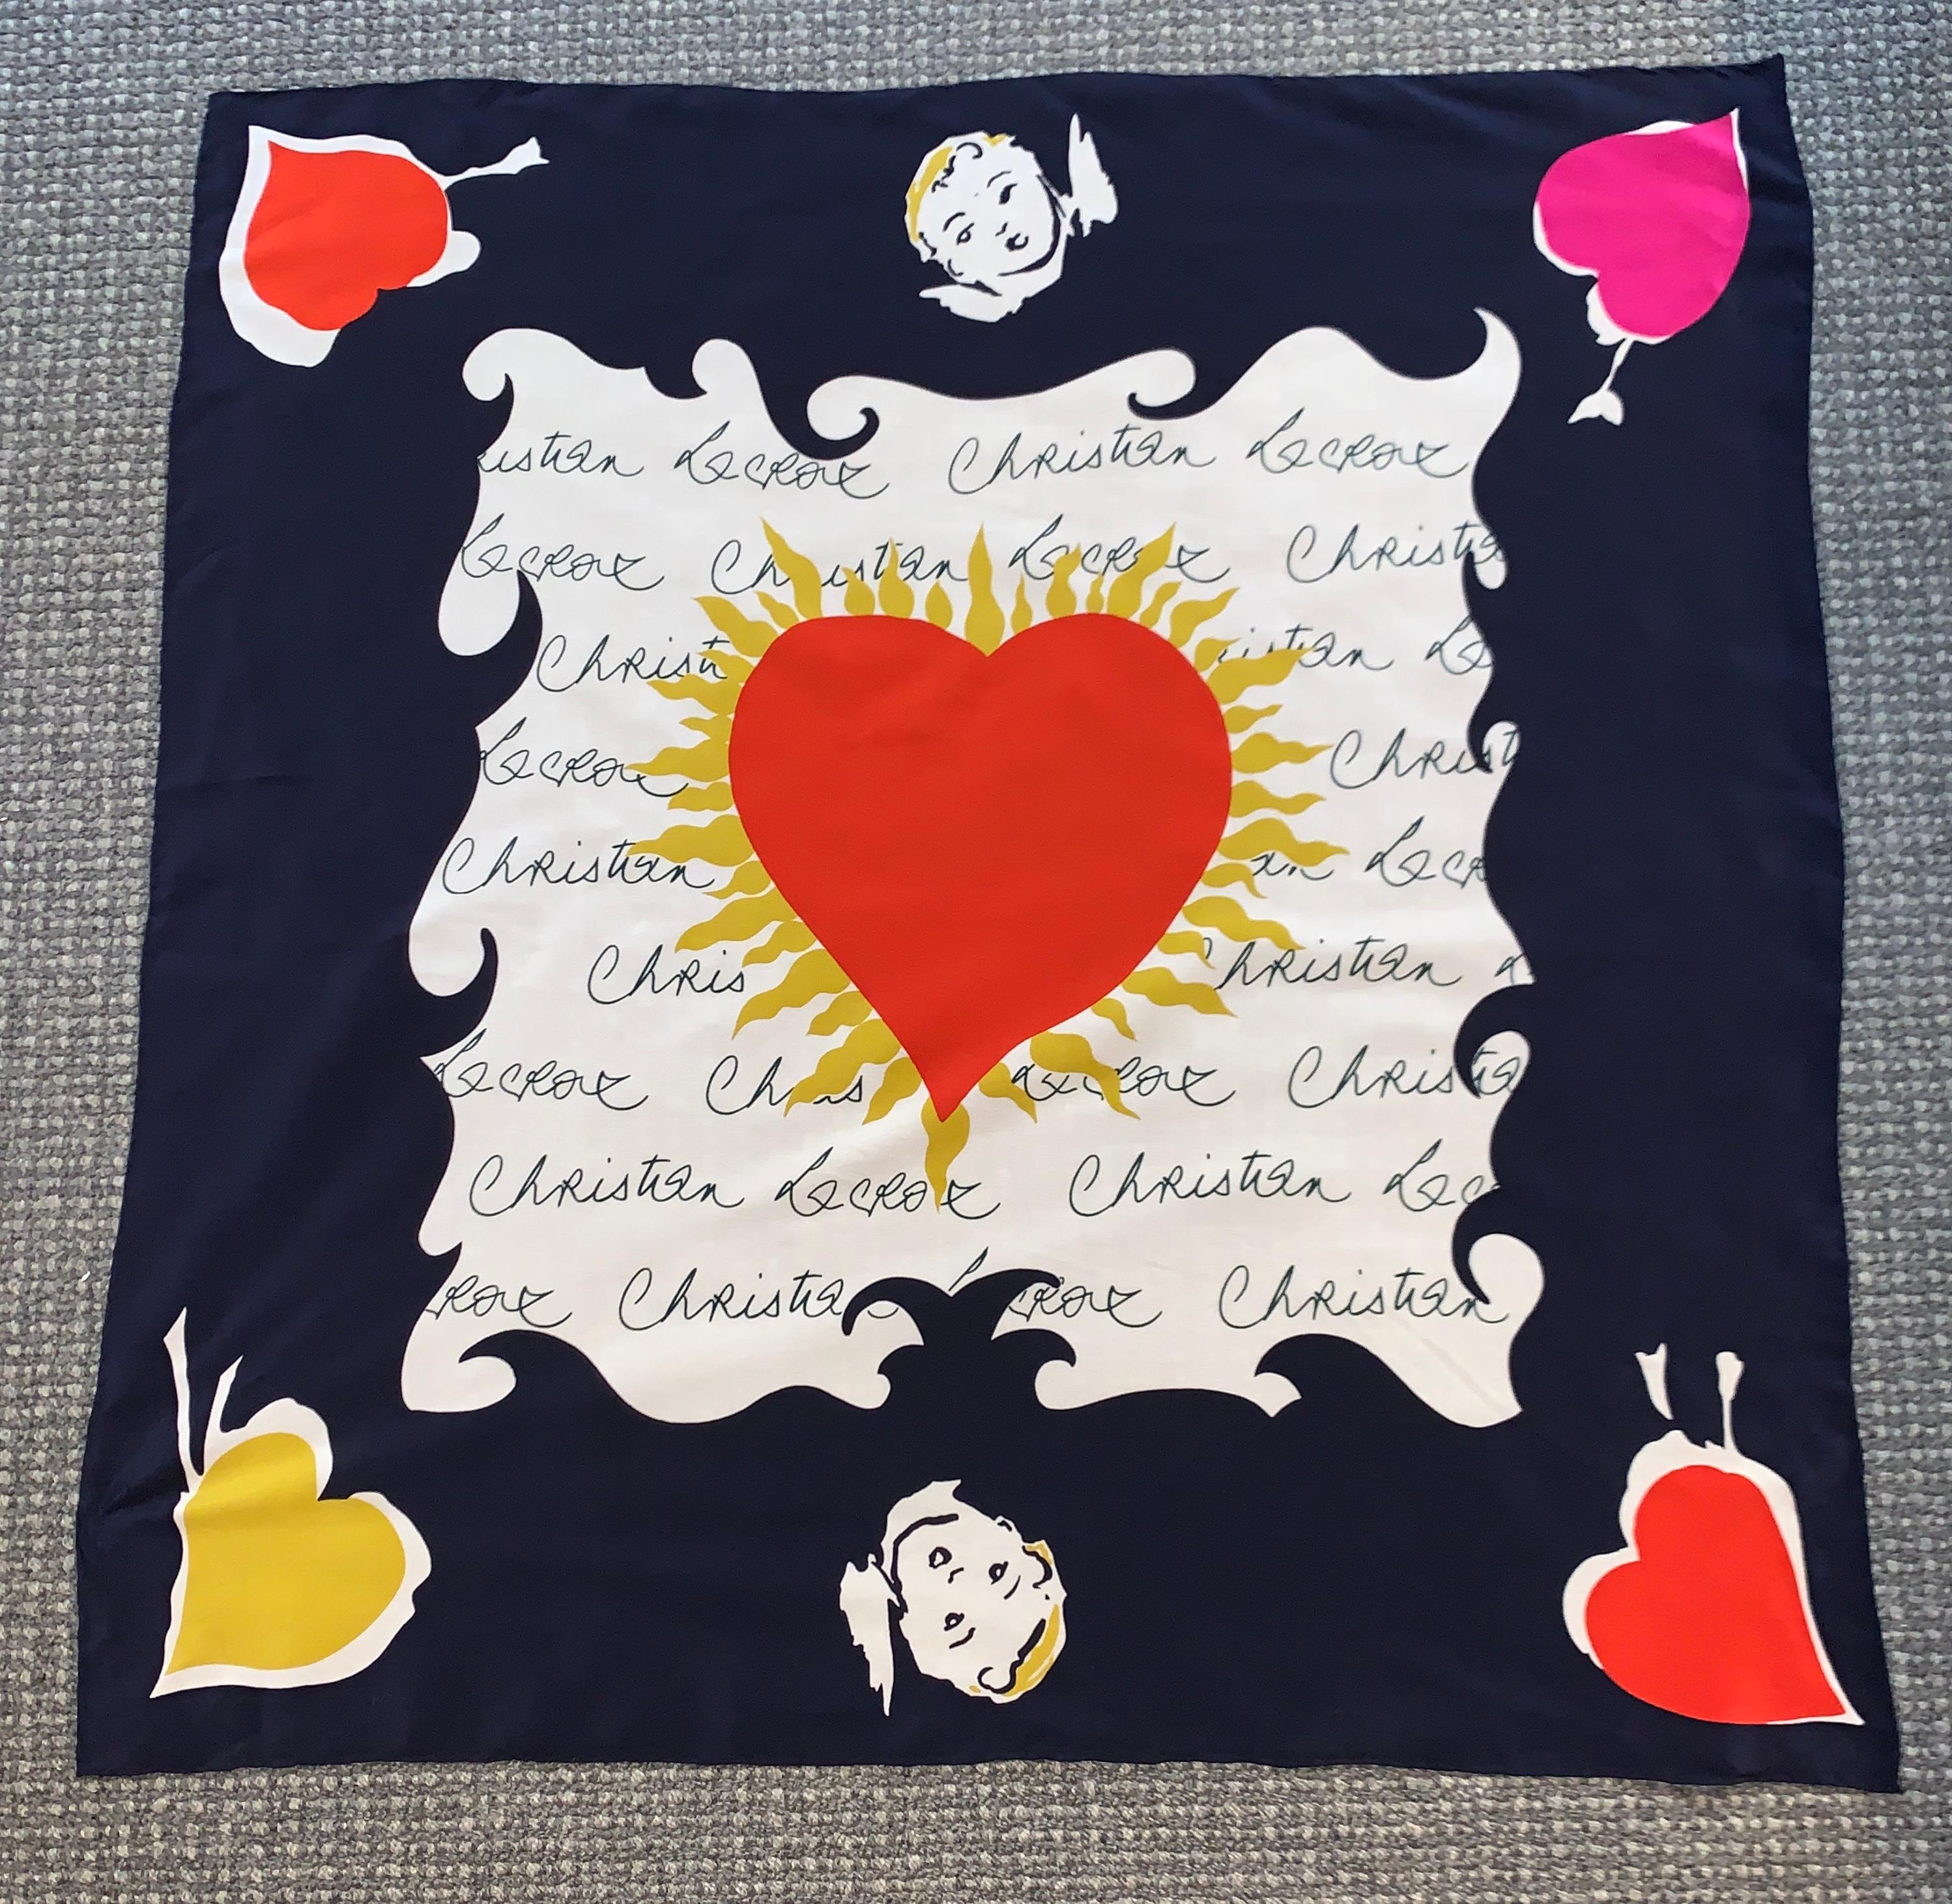 Christian Lacroix silk scarf with black and white signature print featuring cupids and hearts in red, yellow, and pink. Hand rolled edges.

100% silk.

Made in Italy.

Measures approximately 34